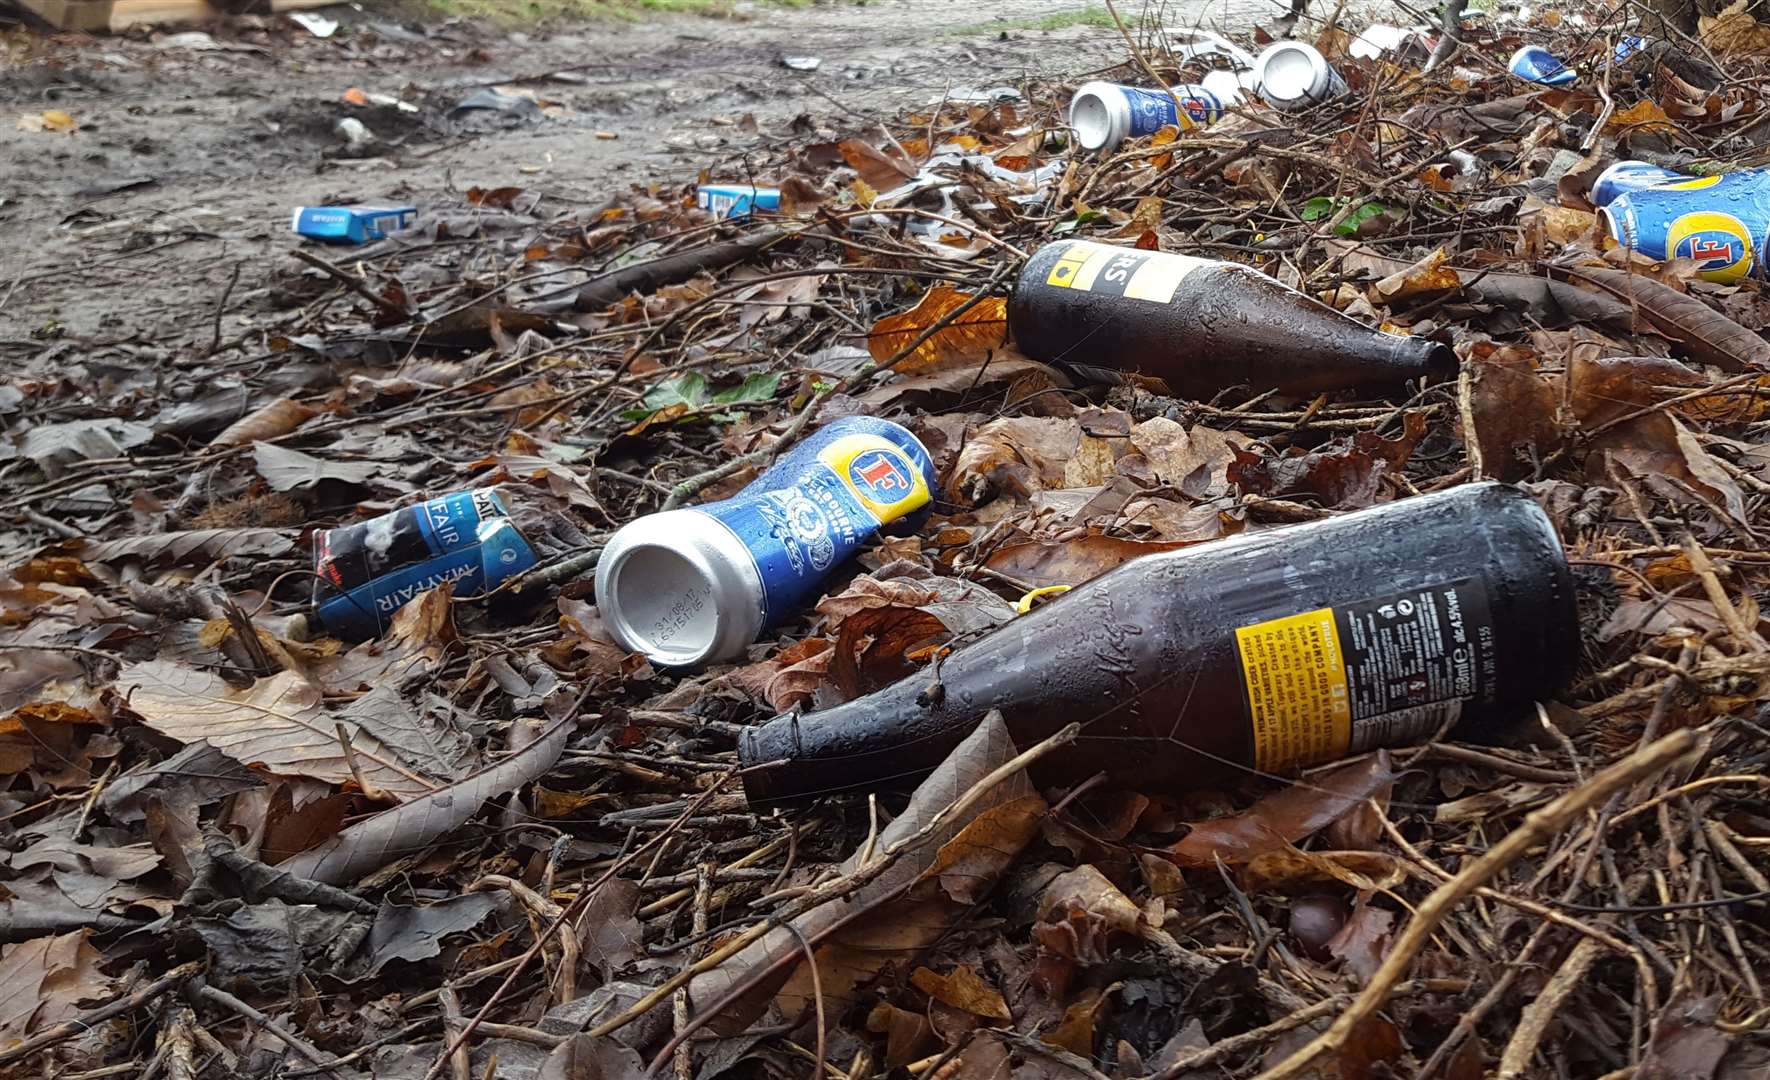 Beer bottles are to be banned from many district beauty spots